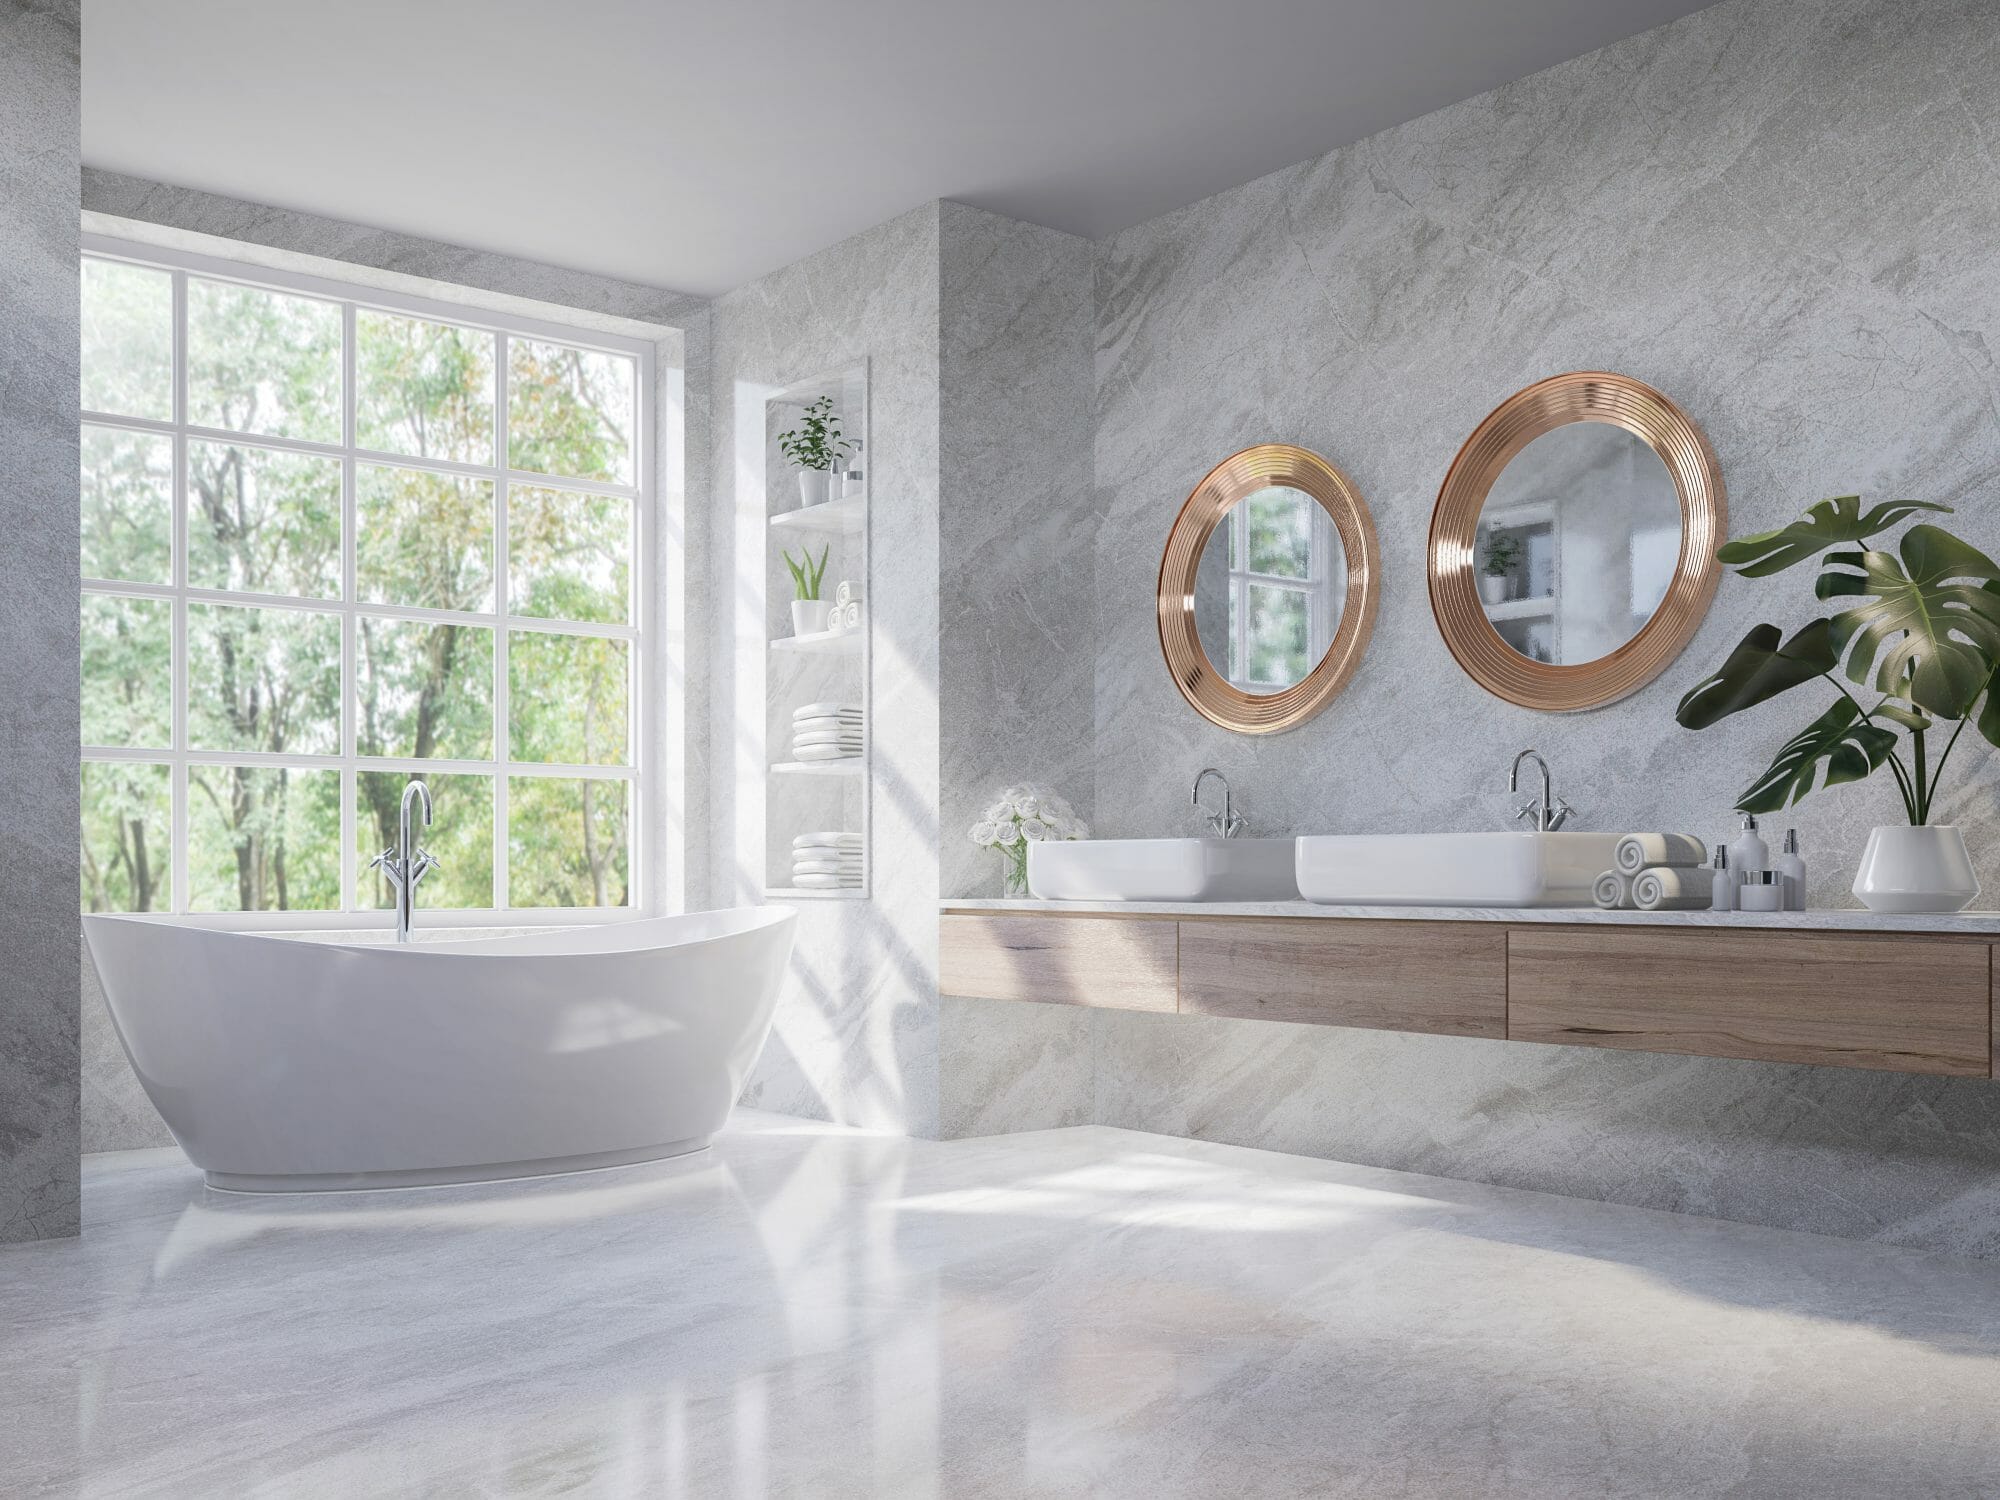 10 Quick Tips for Adding a Luxurious Feel to Your Bathroom